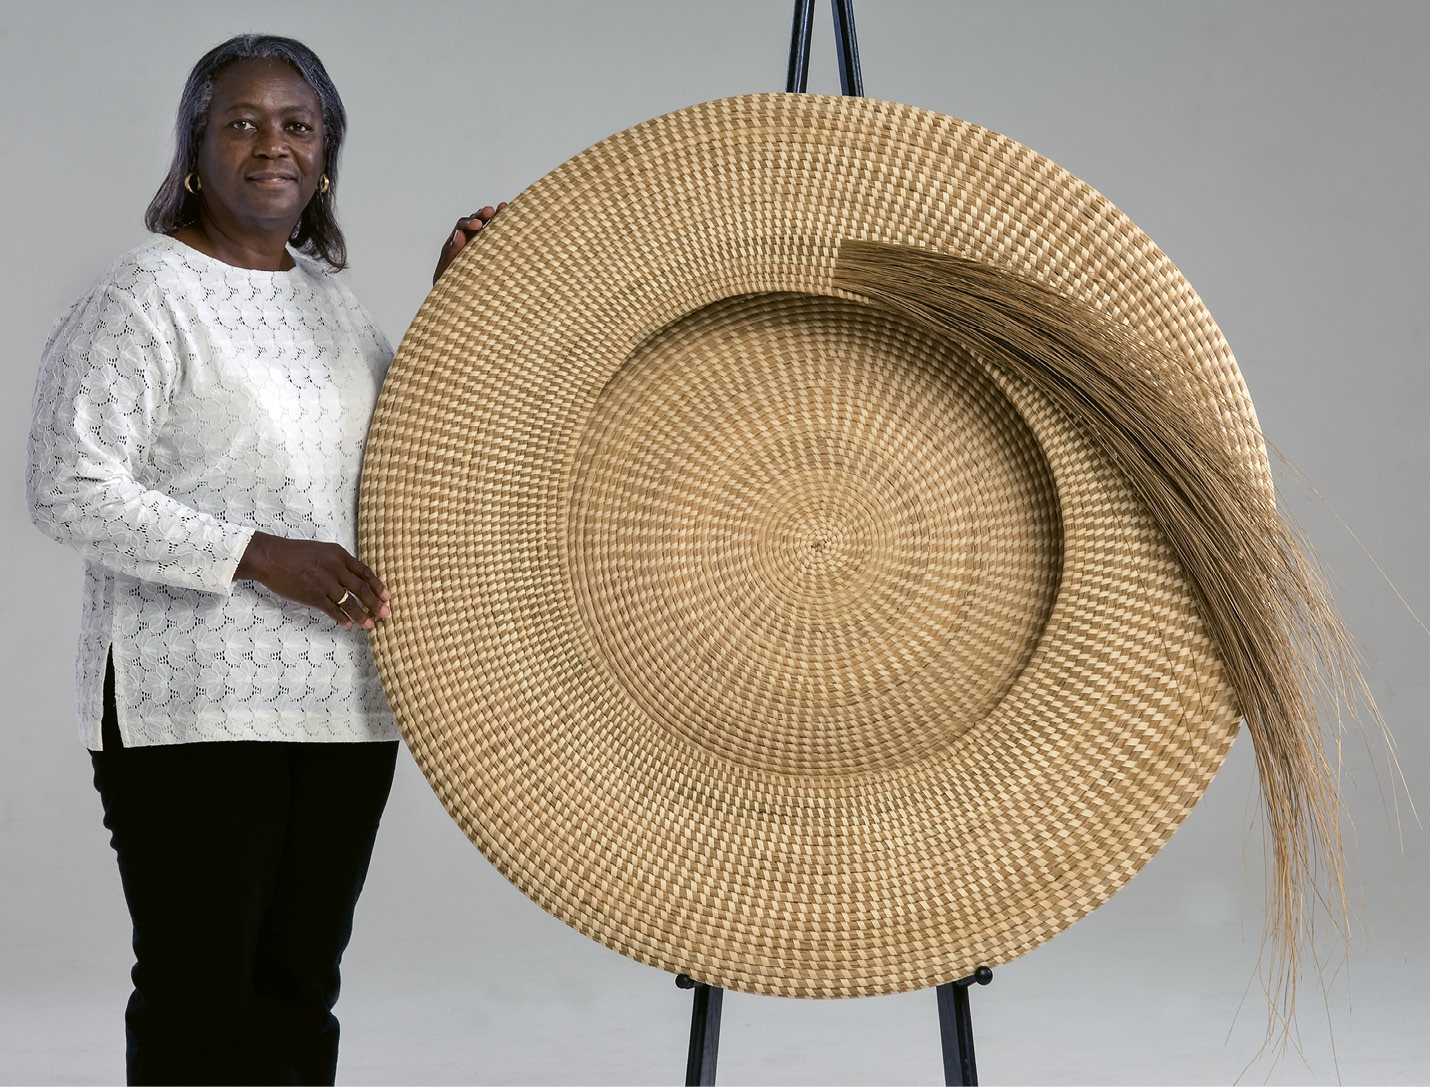 One &amp; Done: Commissioned by a patron who later donated it to the Gibbes, Jackson’s Never Again (2007, sweetgrass and palmetto, 42 inches) took three years of intricate work. A masterpiece of craft, the shape harkens back to the traditional flat rice baskets, but takes it to a soaring new level.